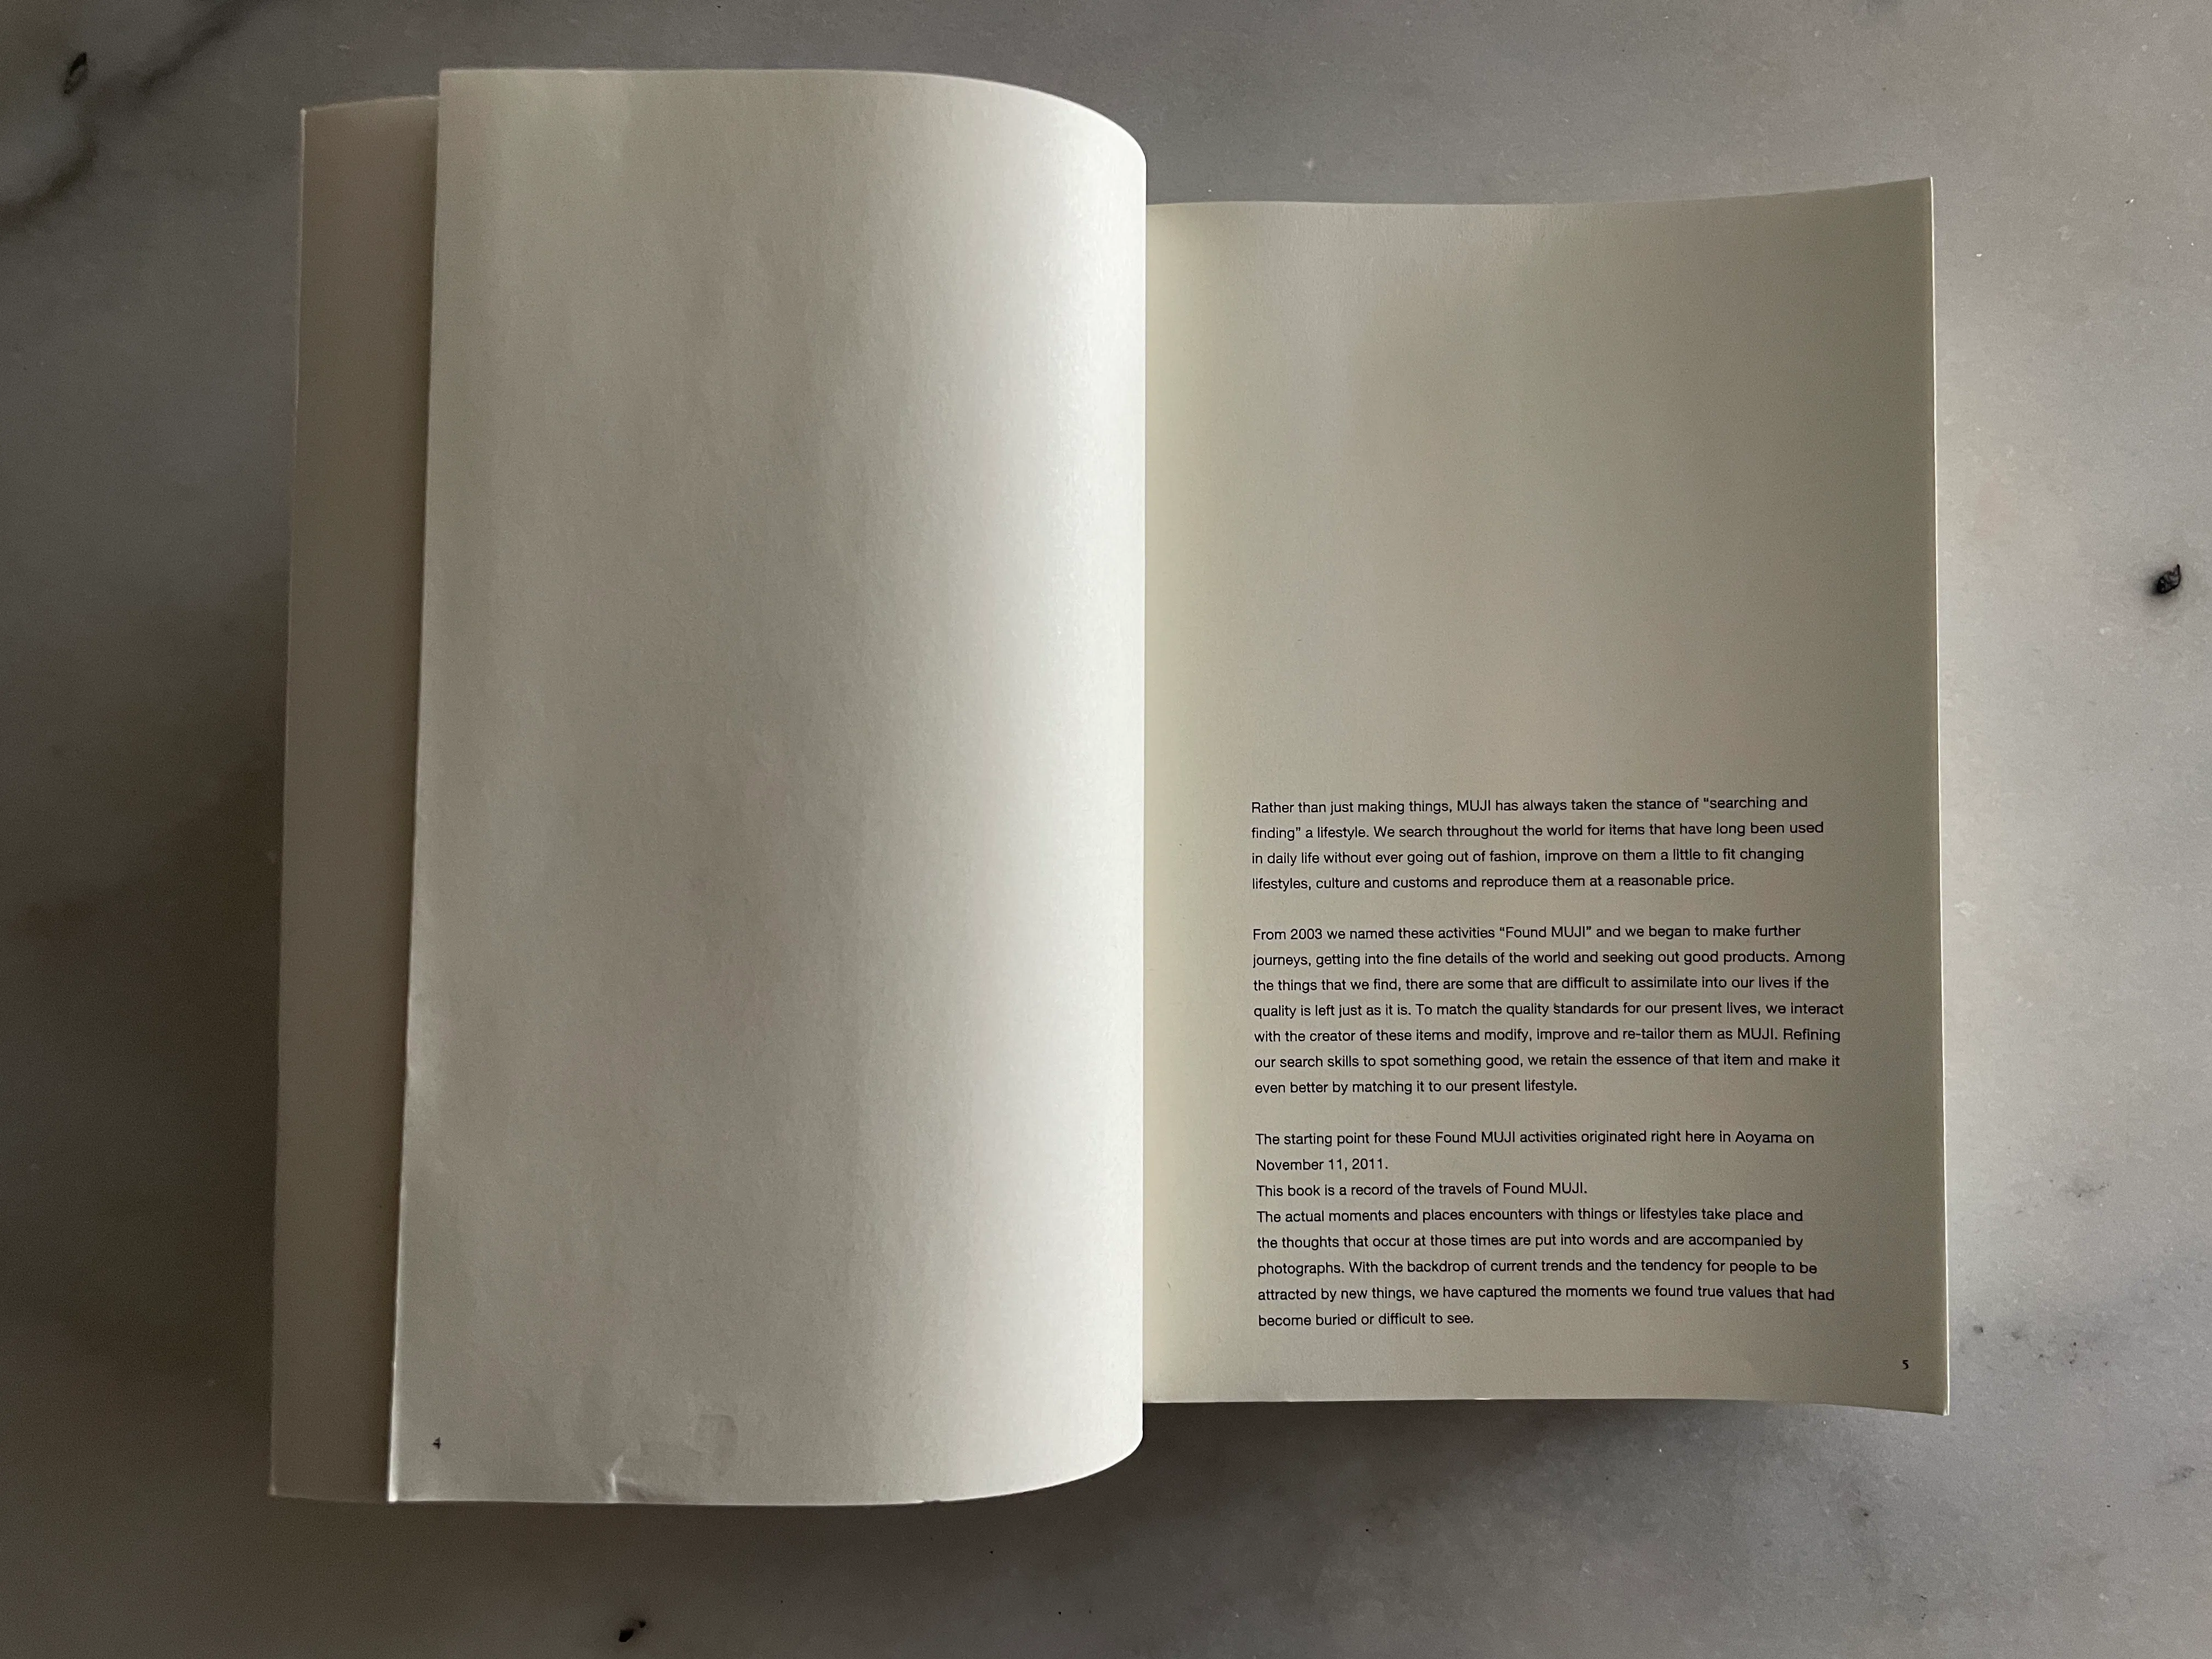 A photograph of the first page of Found Muji. The text of this page is quoted in its entirety below.